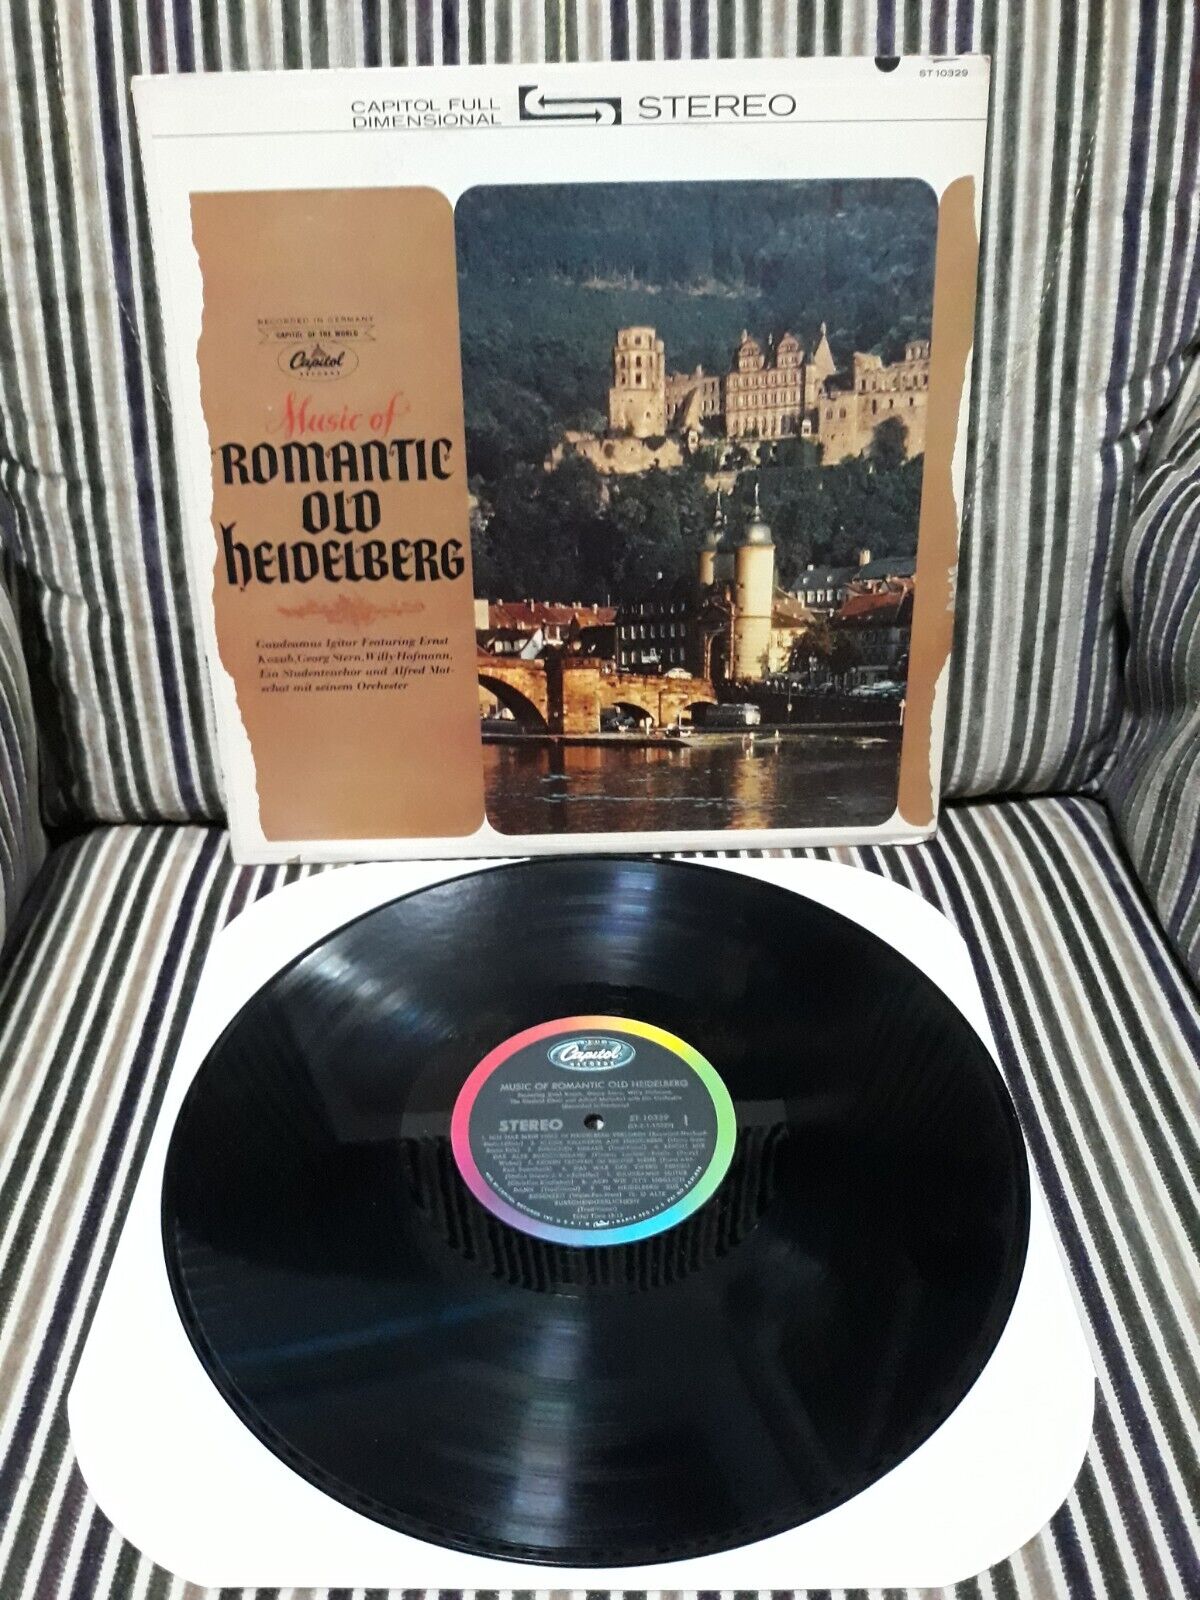 Music Of Romantic Old Heidelberg-Capitol Records-ST10329-Stereo-1980-NM